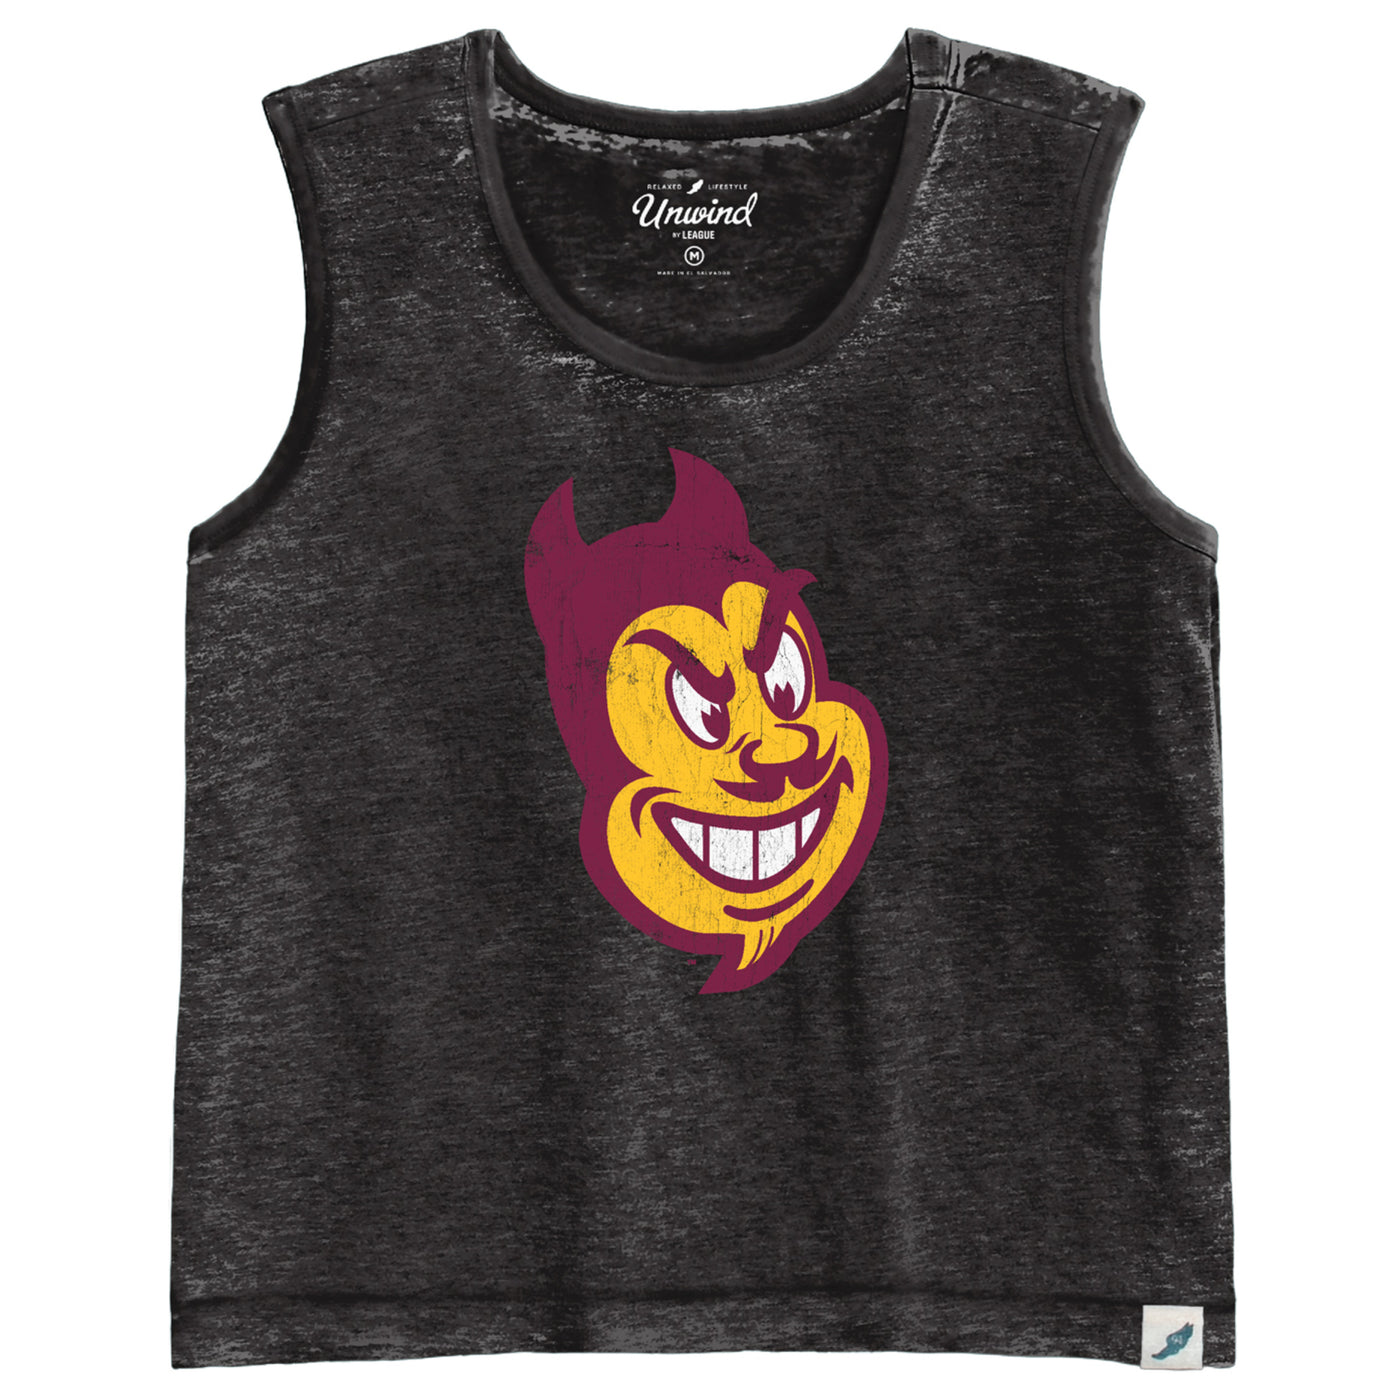 ASU Cropped Black tank with the sparky mascot face on the center of the chest.